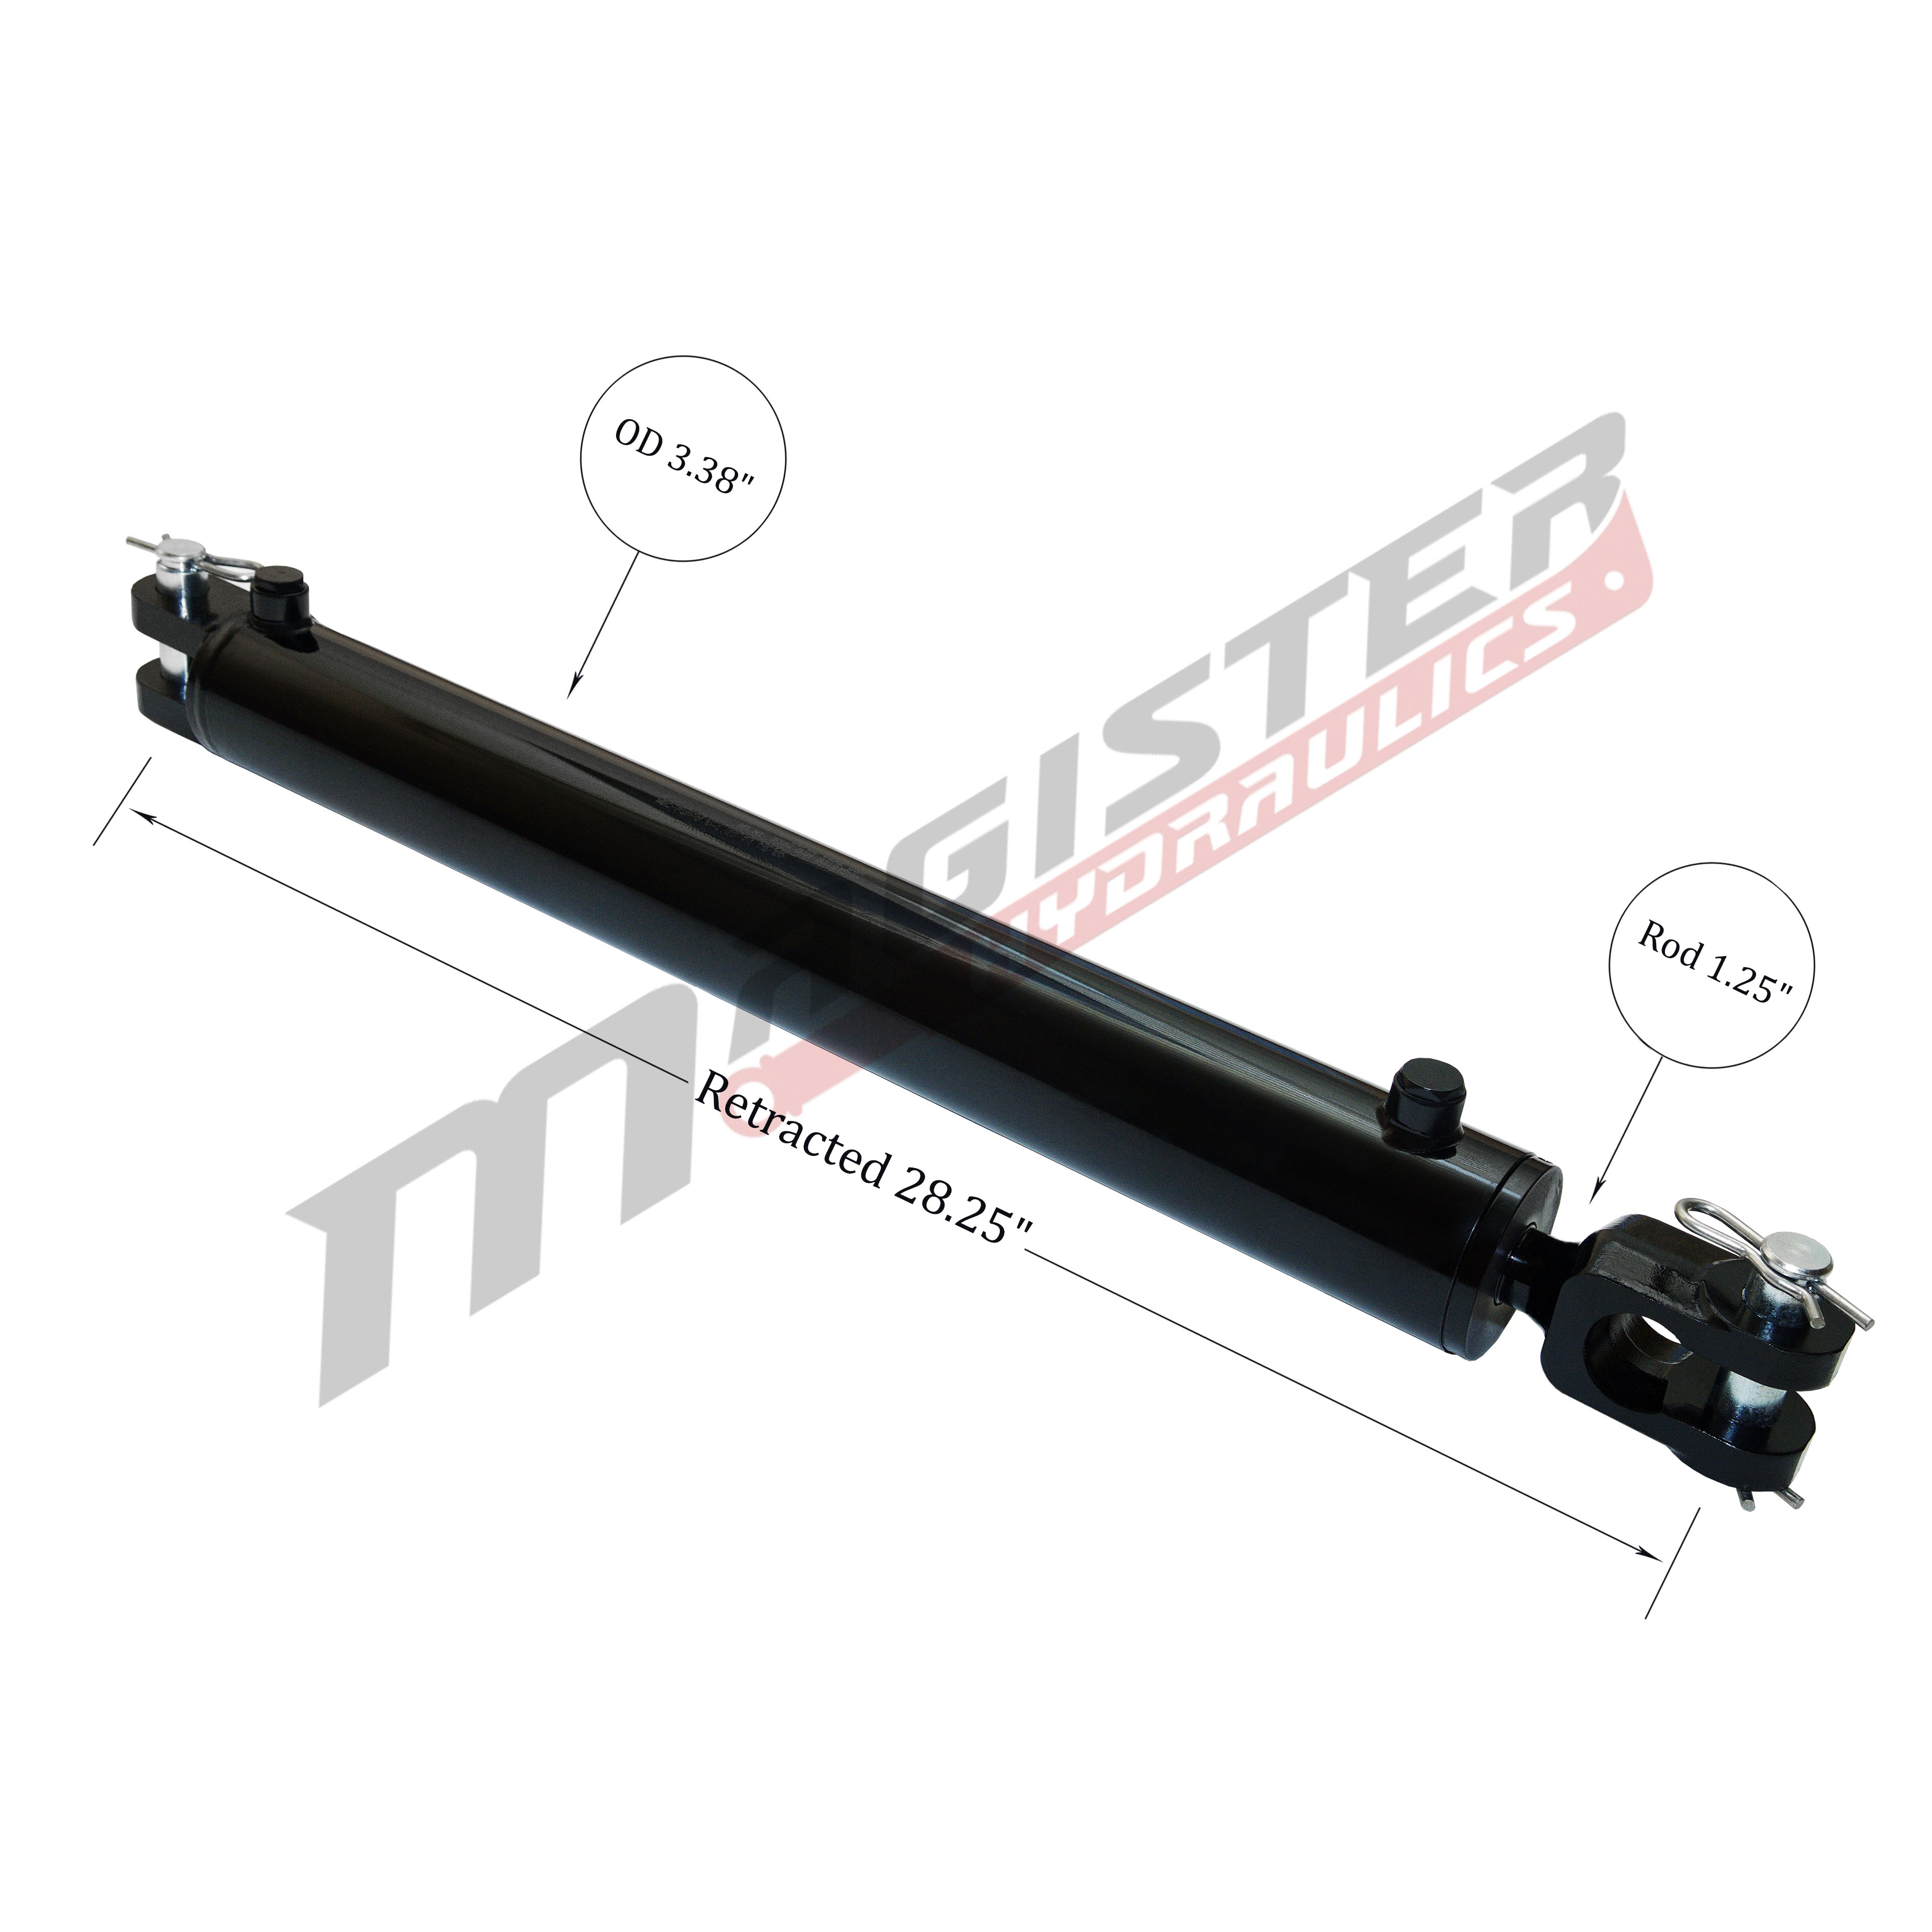 3 bore x 18 stroke hydraulic cylinder, ag clevis double acting cylinder | Magister Hydraulics